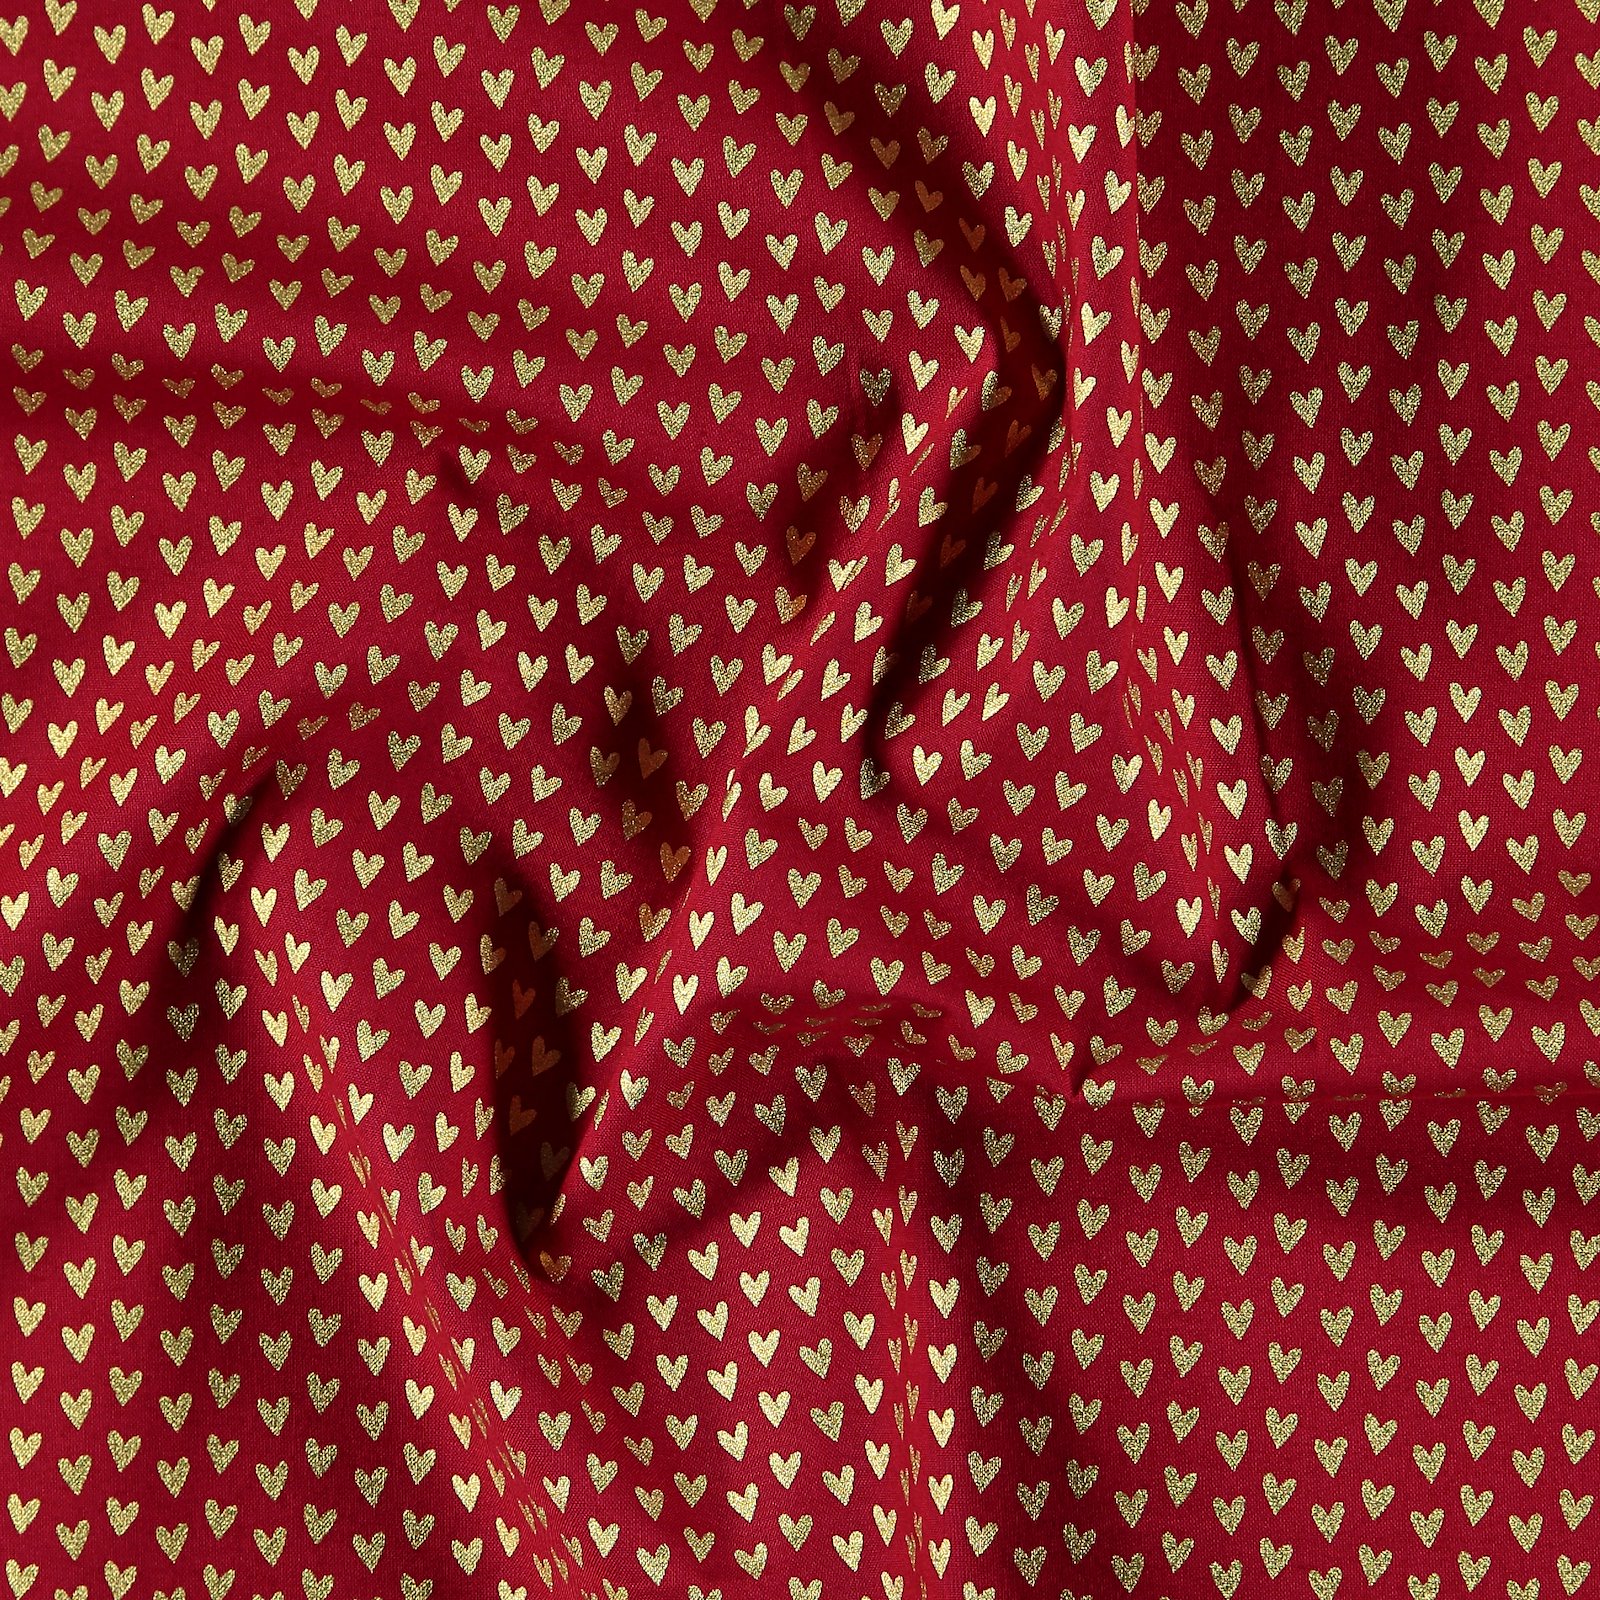 Cotton classic red with gold hearts 852397_pack